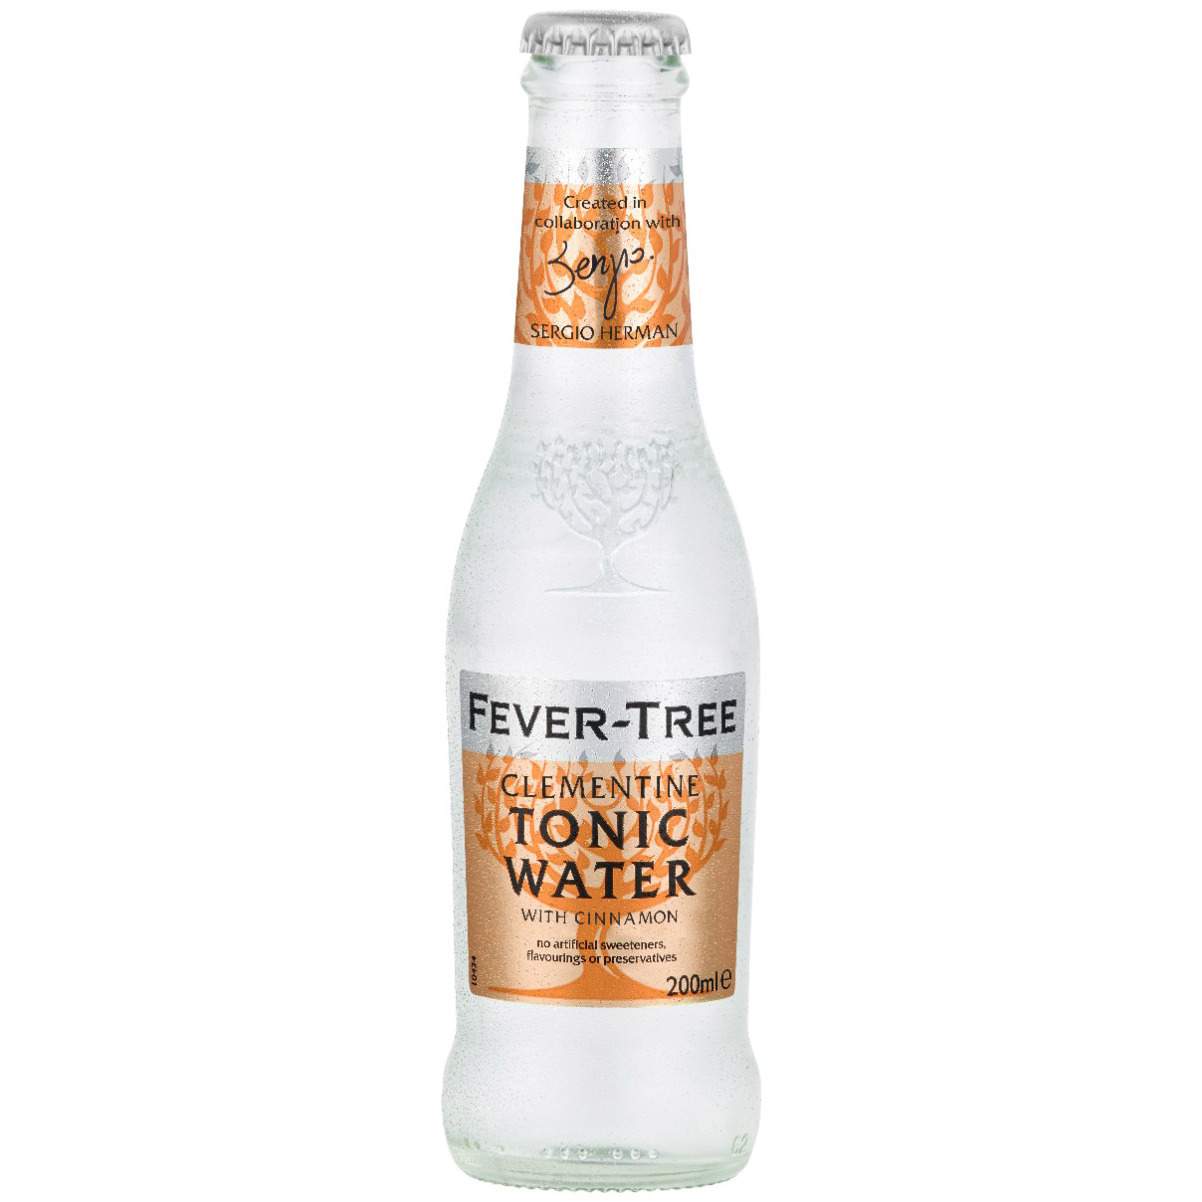 Fever-Tree - Clementine Tonic Water 200ml